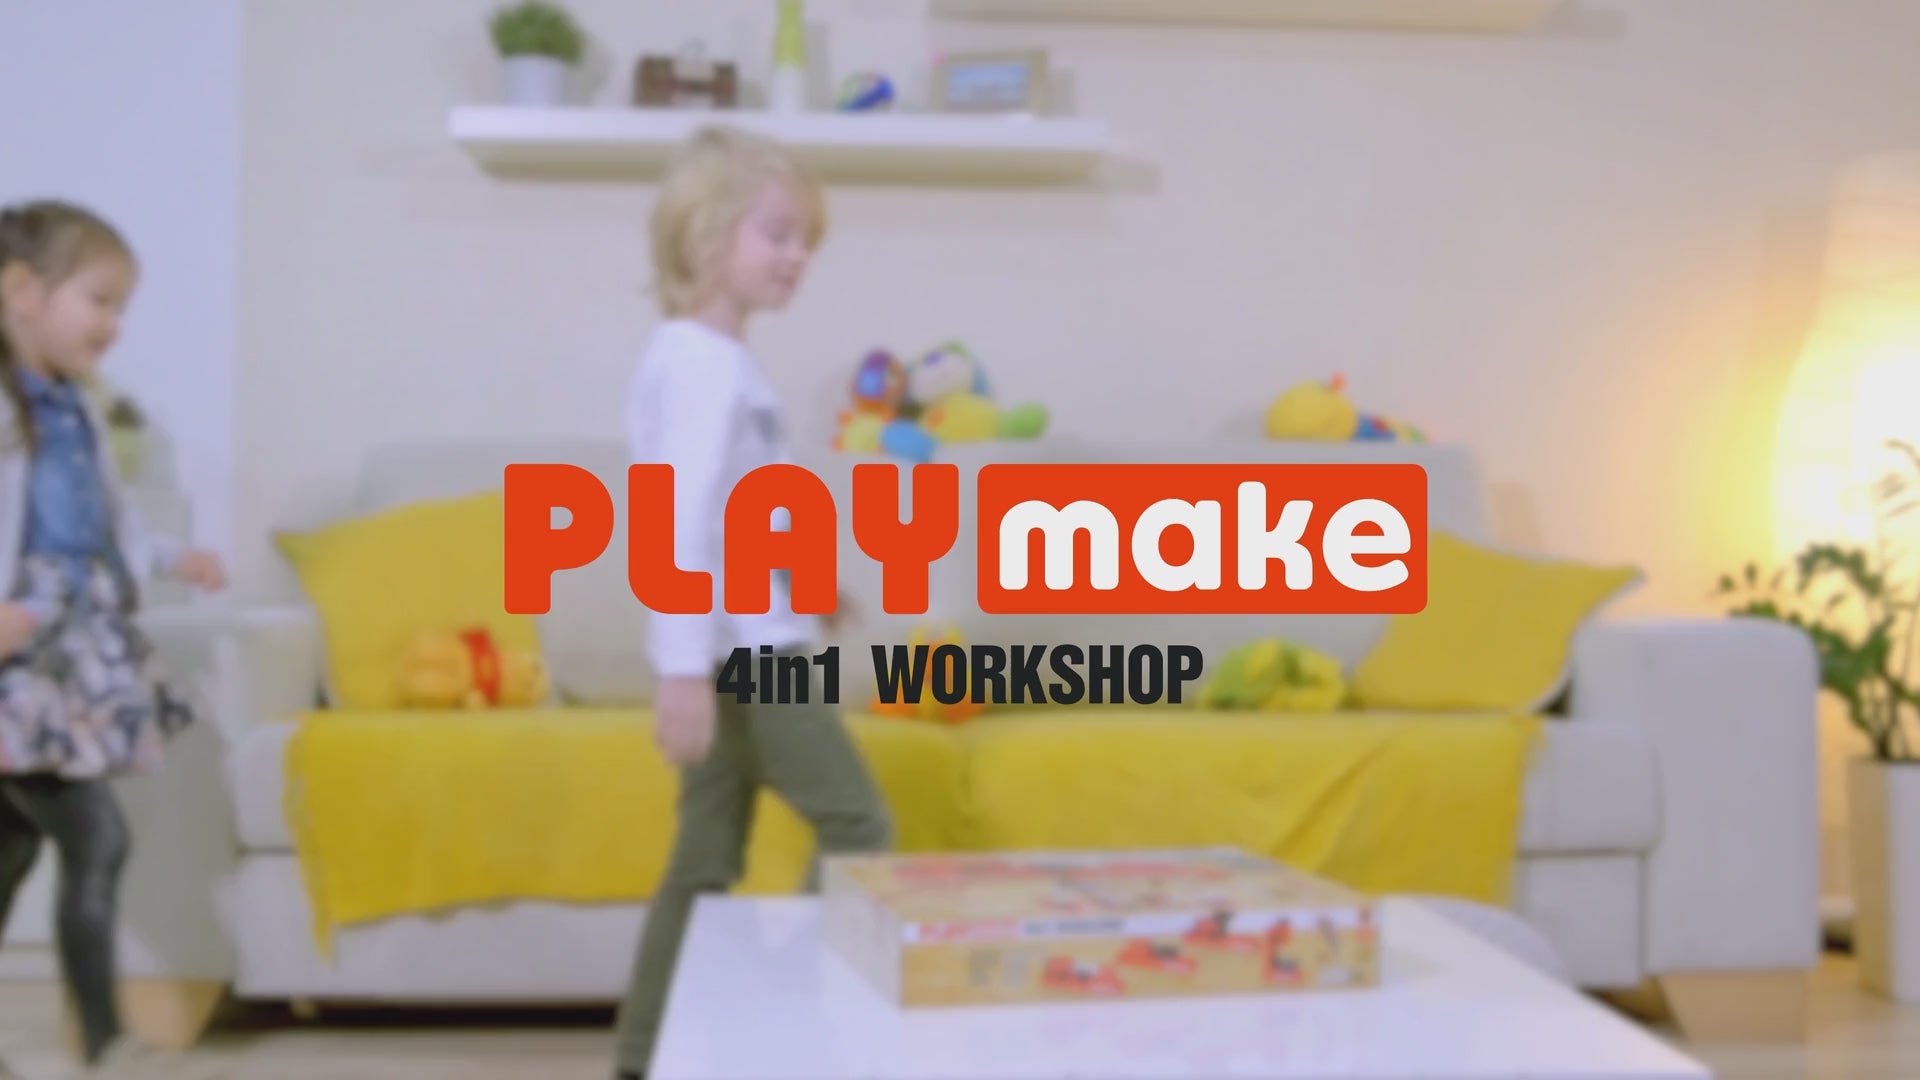 Load video: PLAYmake 4in1 woodworking kit, teaser